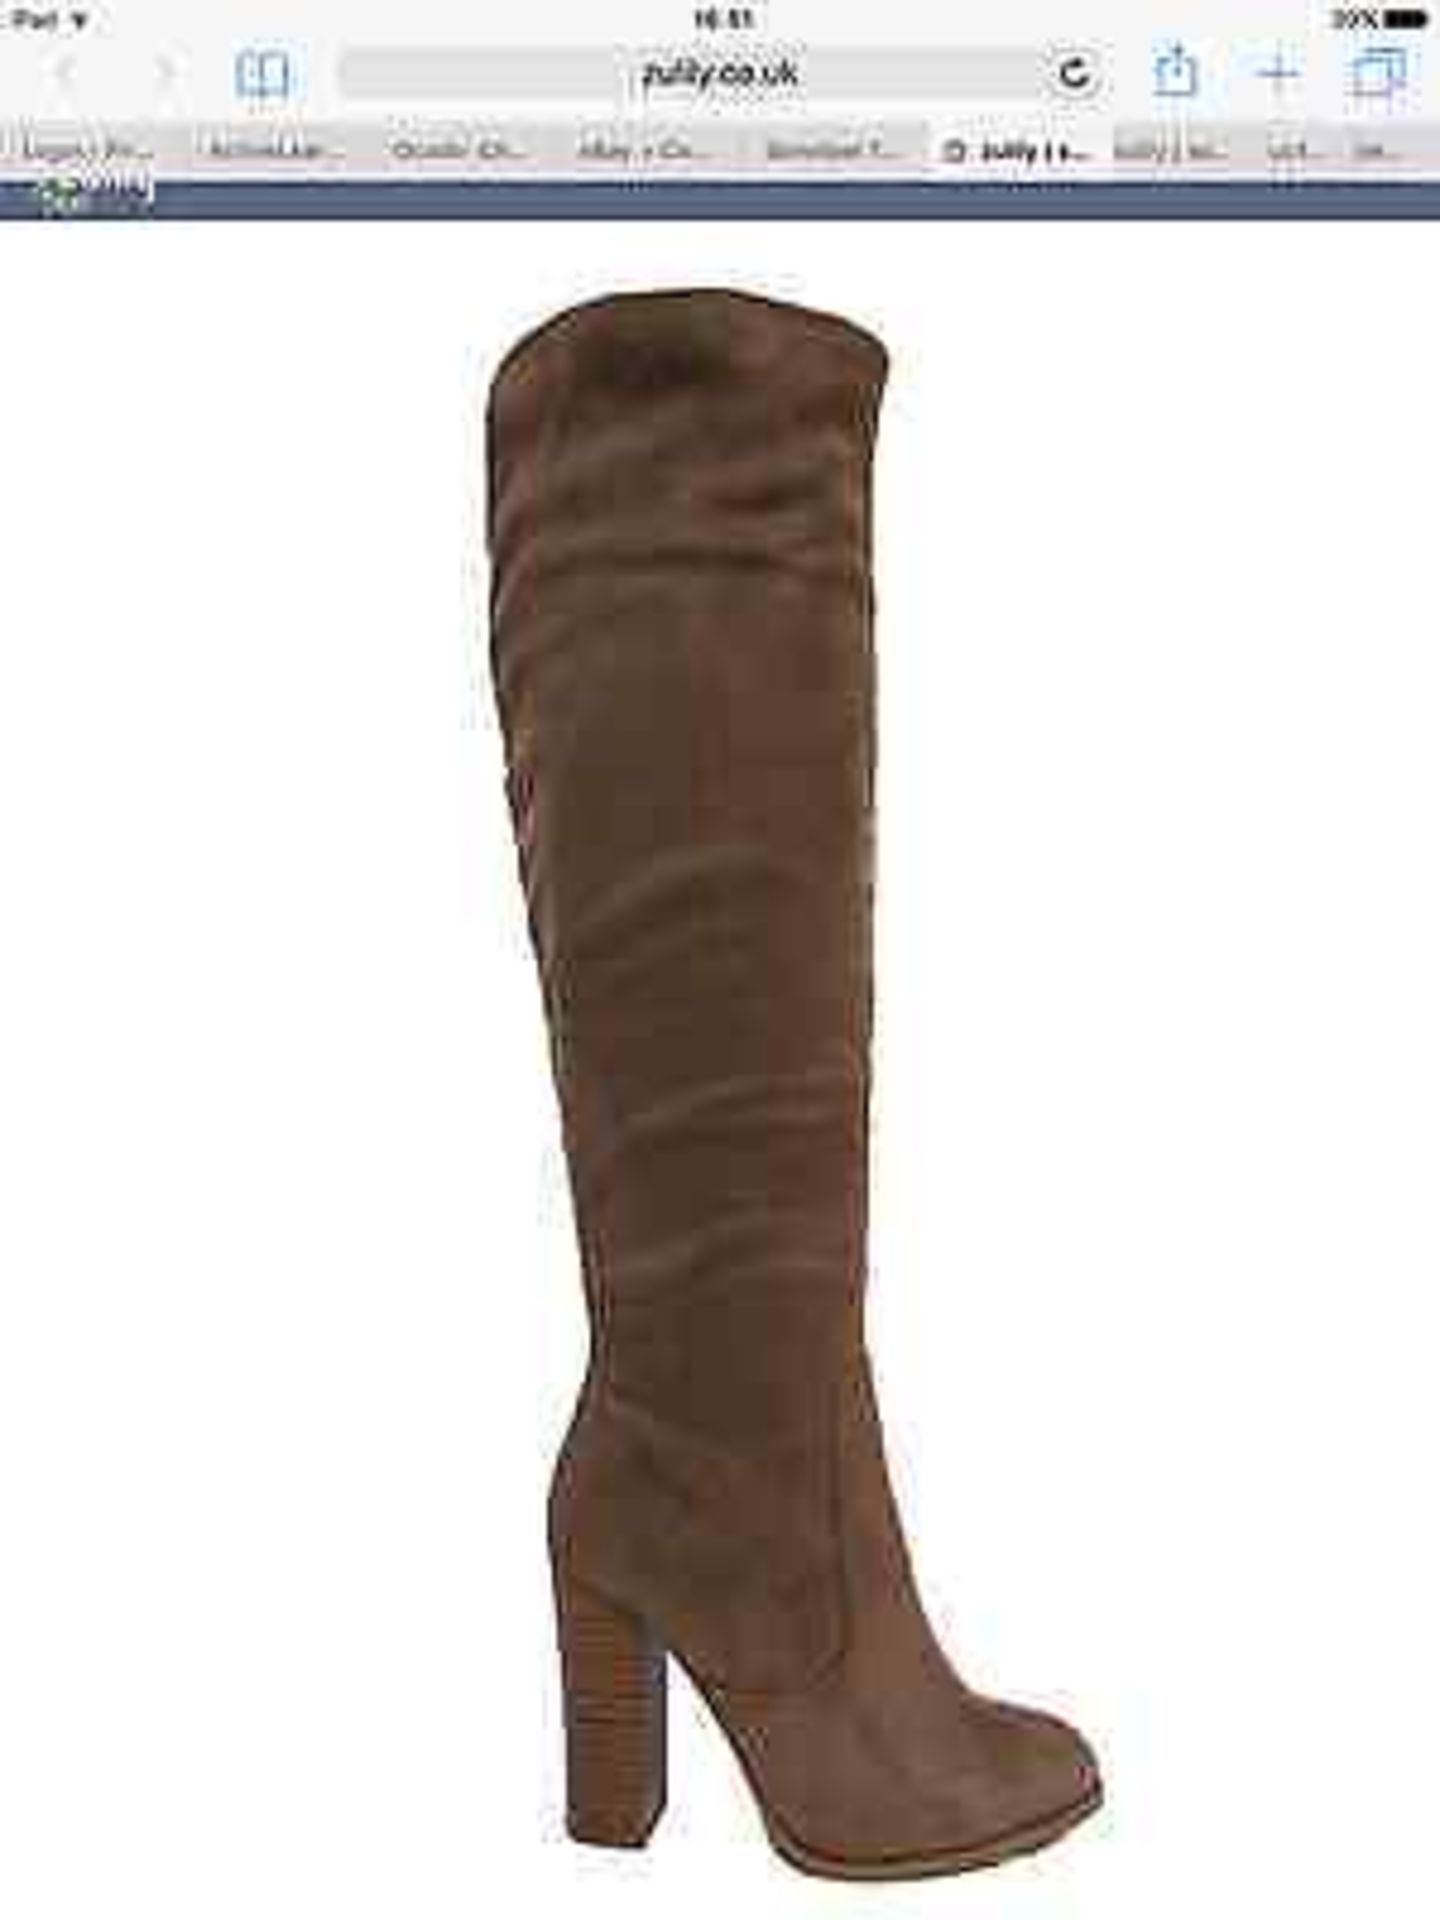 X2B Taupe Baina Boot, Size 6.5-7 (New with box) [Ref: 41703523- G-003] - Image 3 of 3